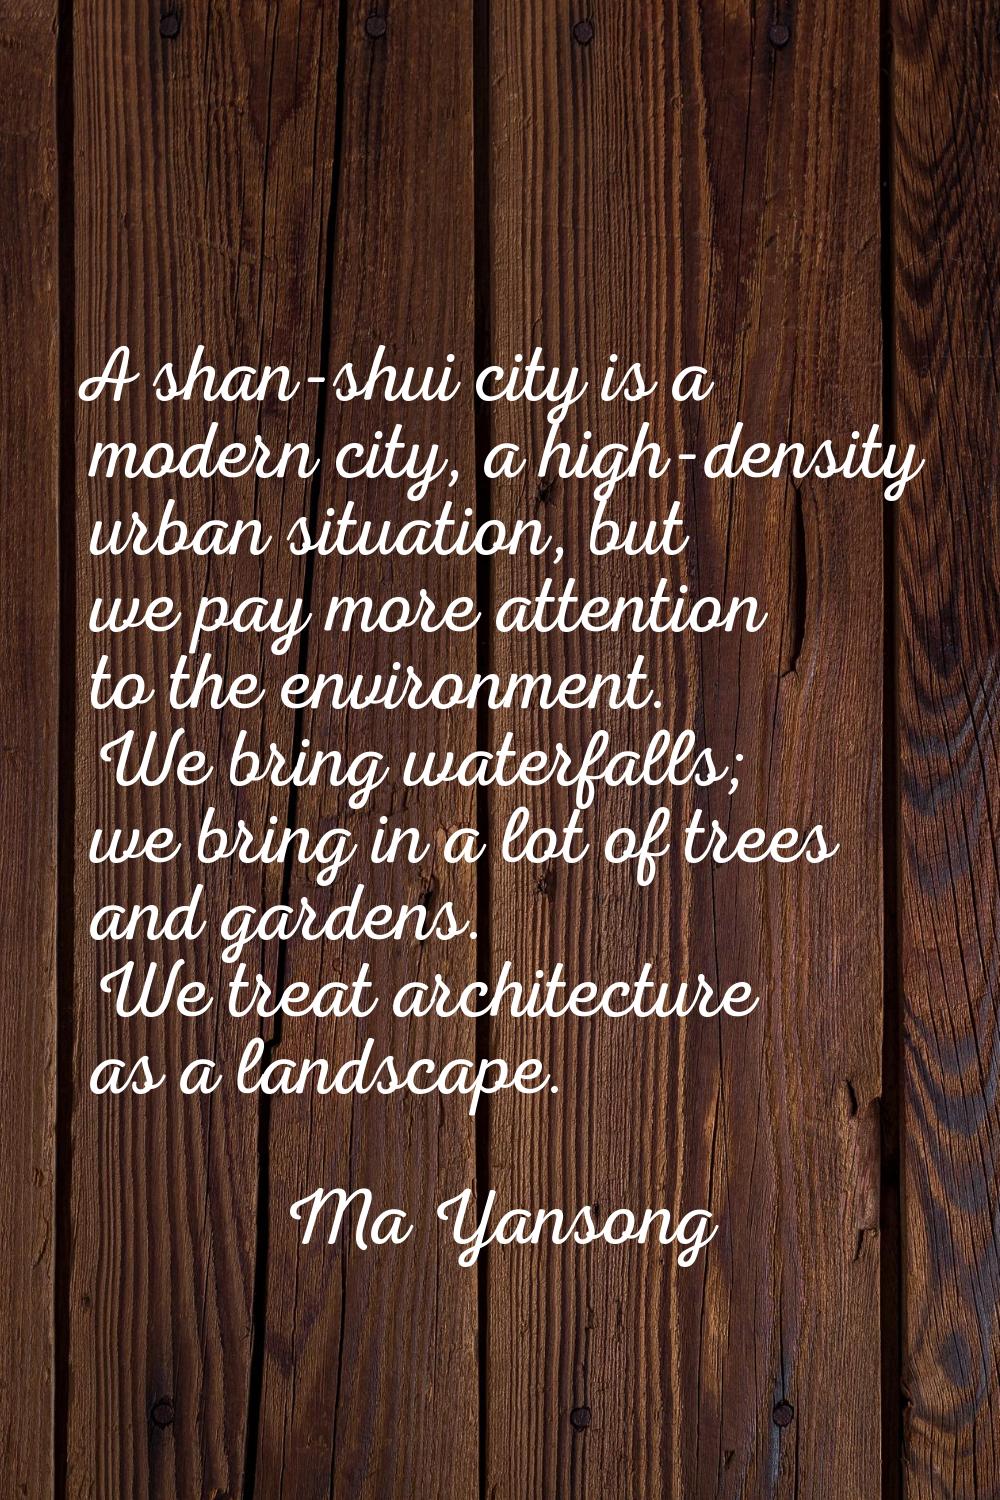 A shan-shui city is a modern city, a high-density urban situation, but we pay more attention to the